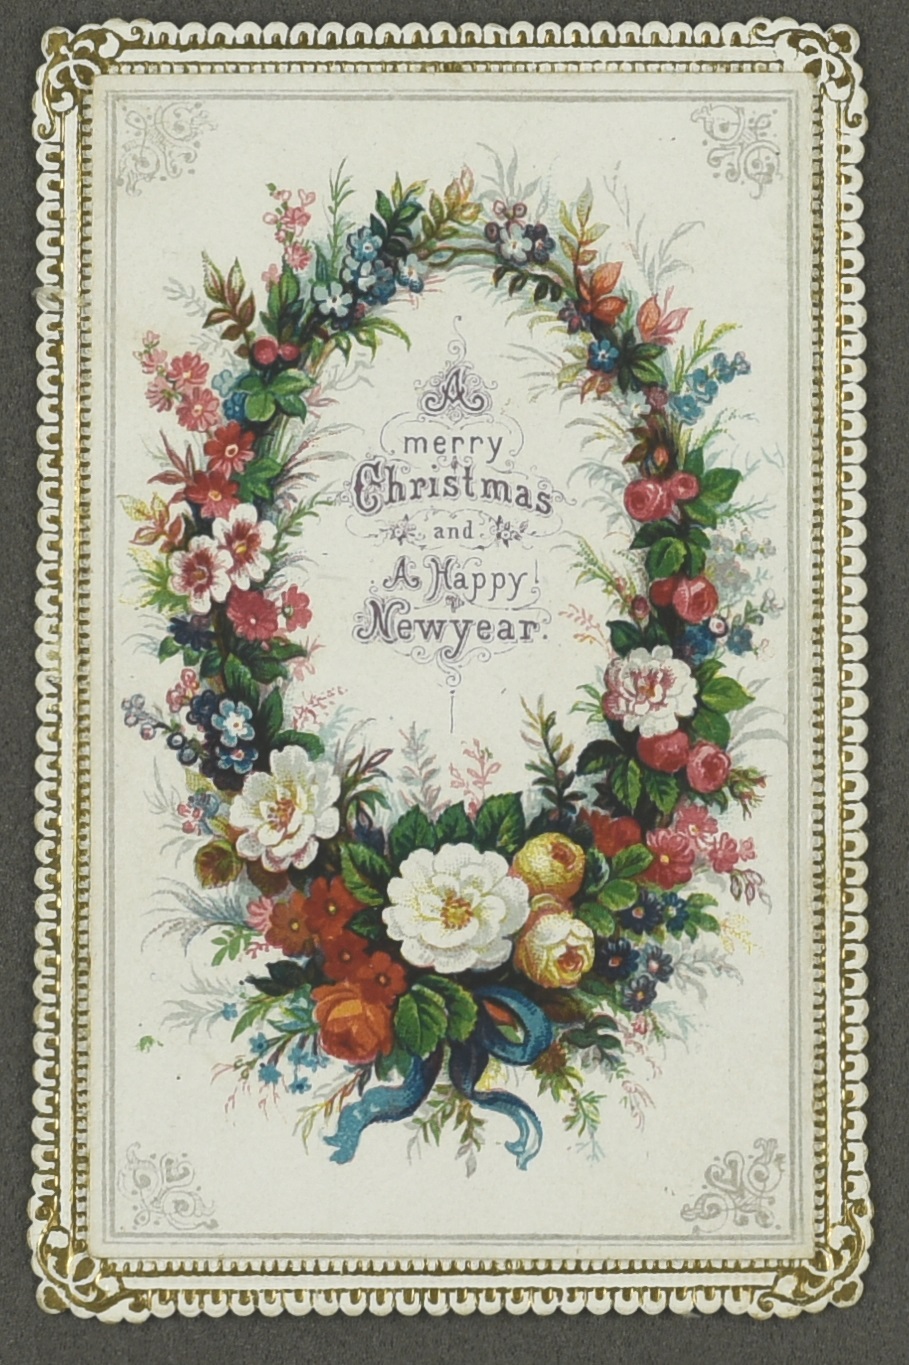 Christmas greetings card depicting a floral wreath